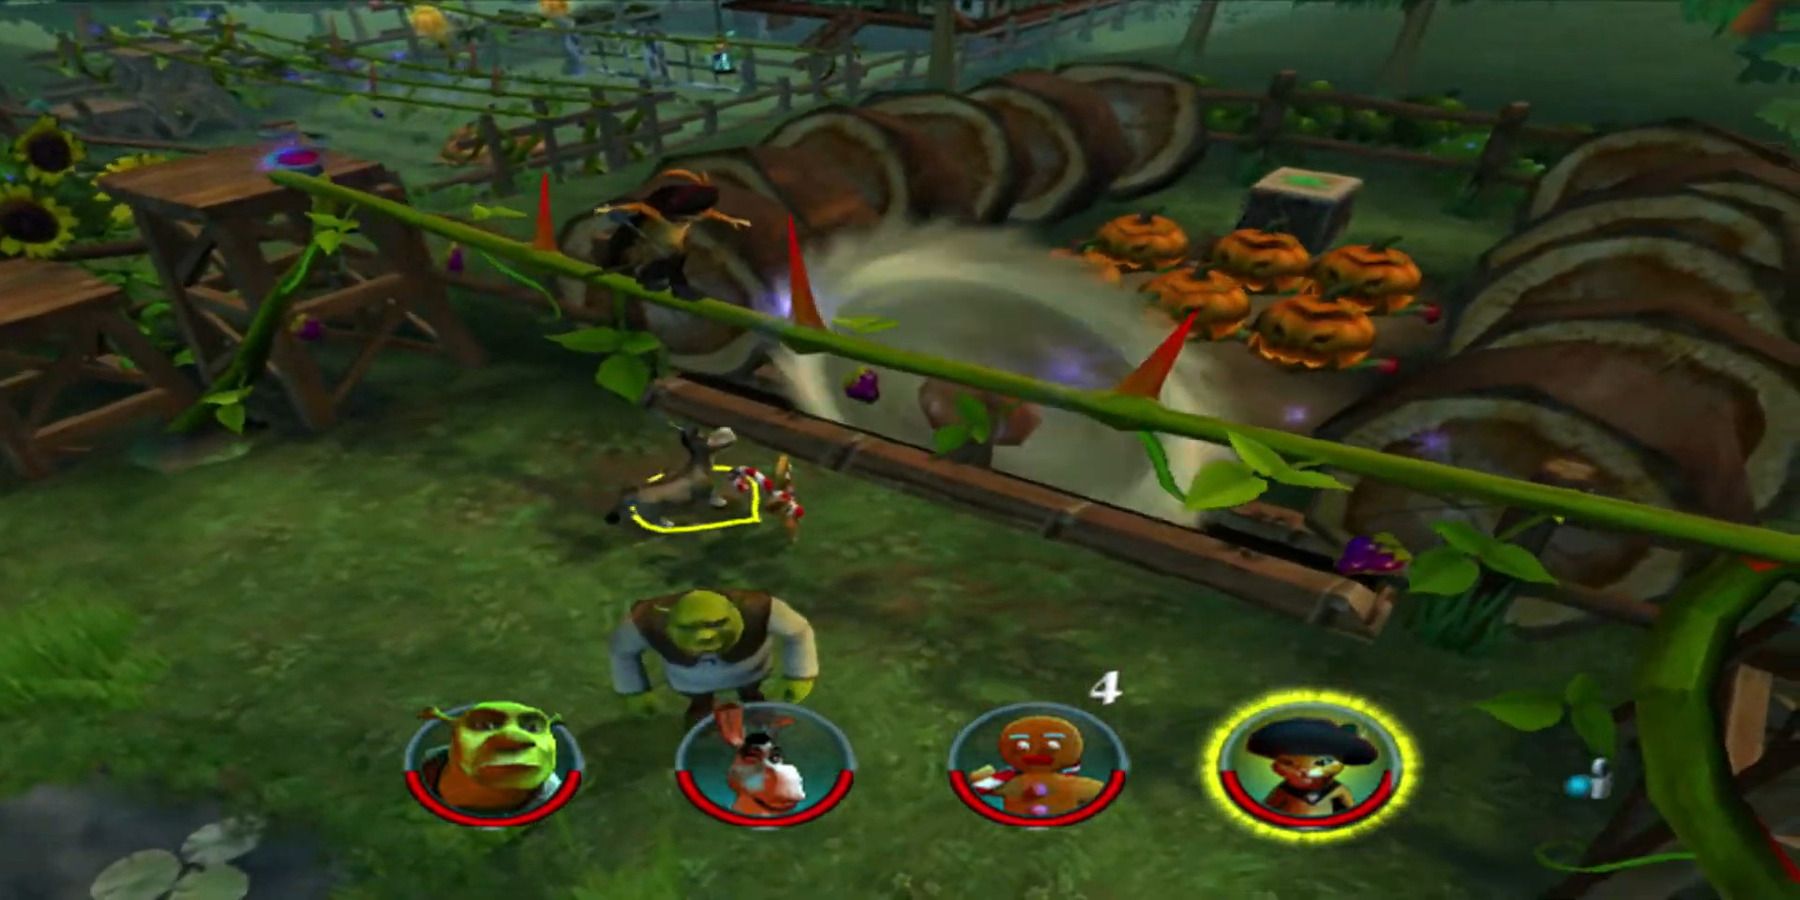 A screenshot of Shrek 2 with characters Donkey, Gingerbread Man and Puss In Boots